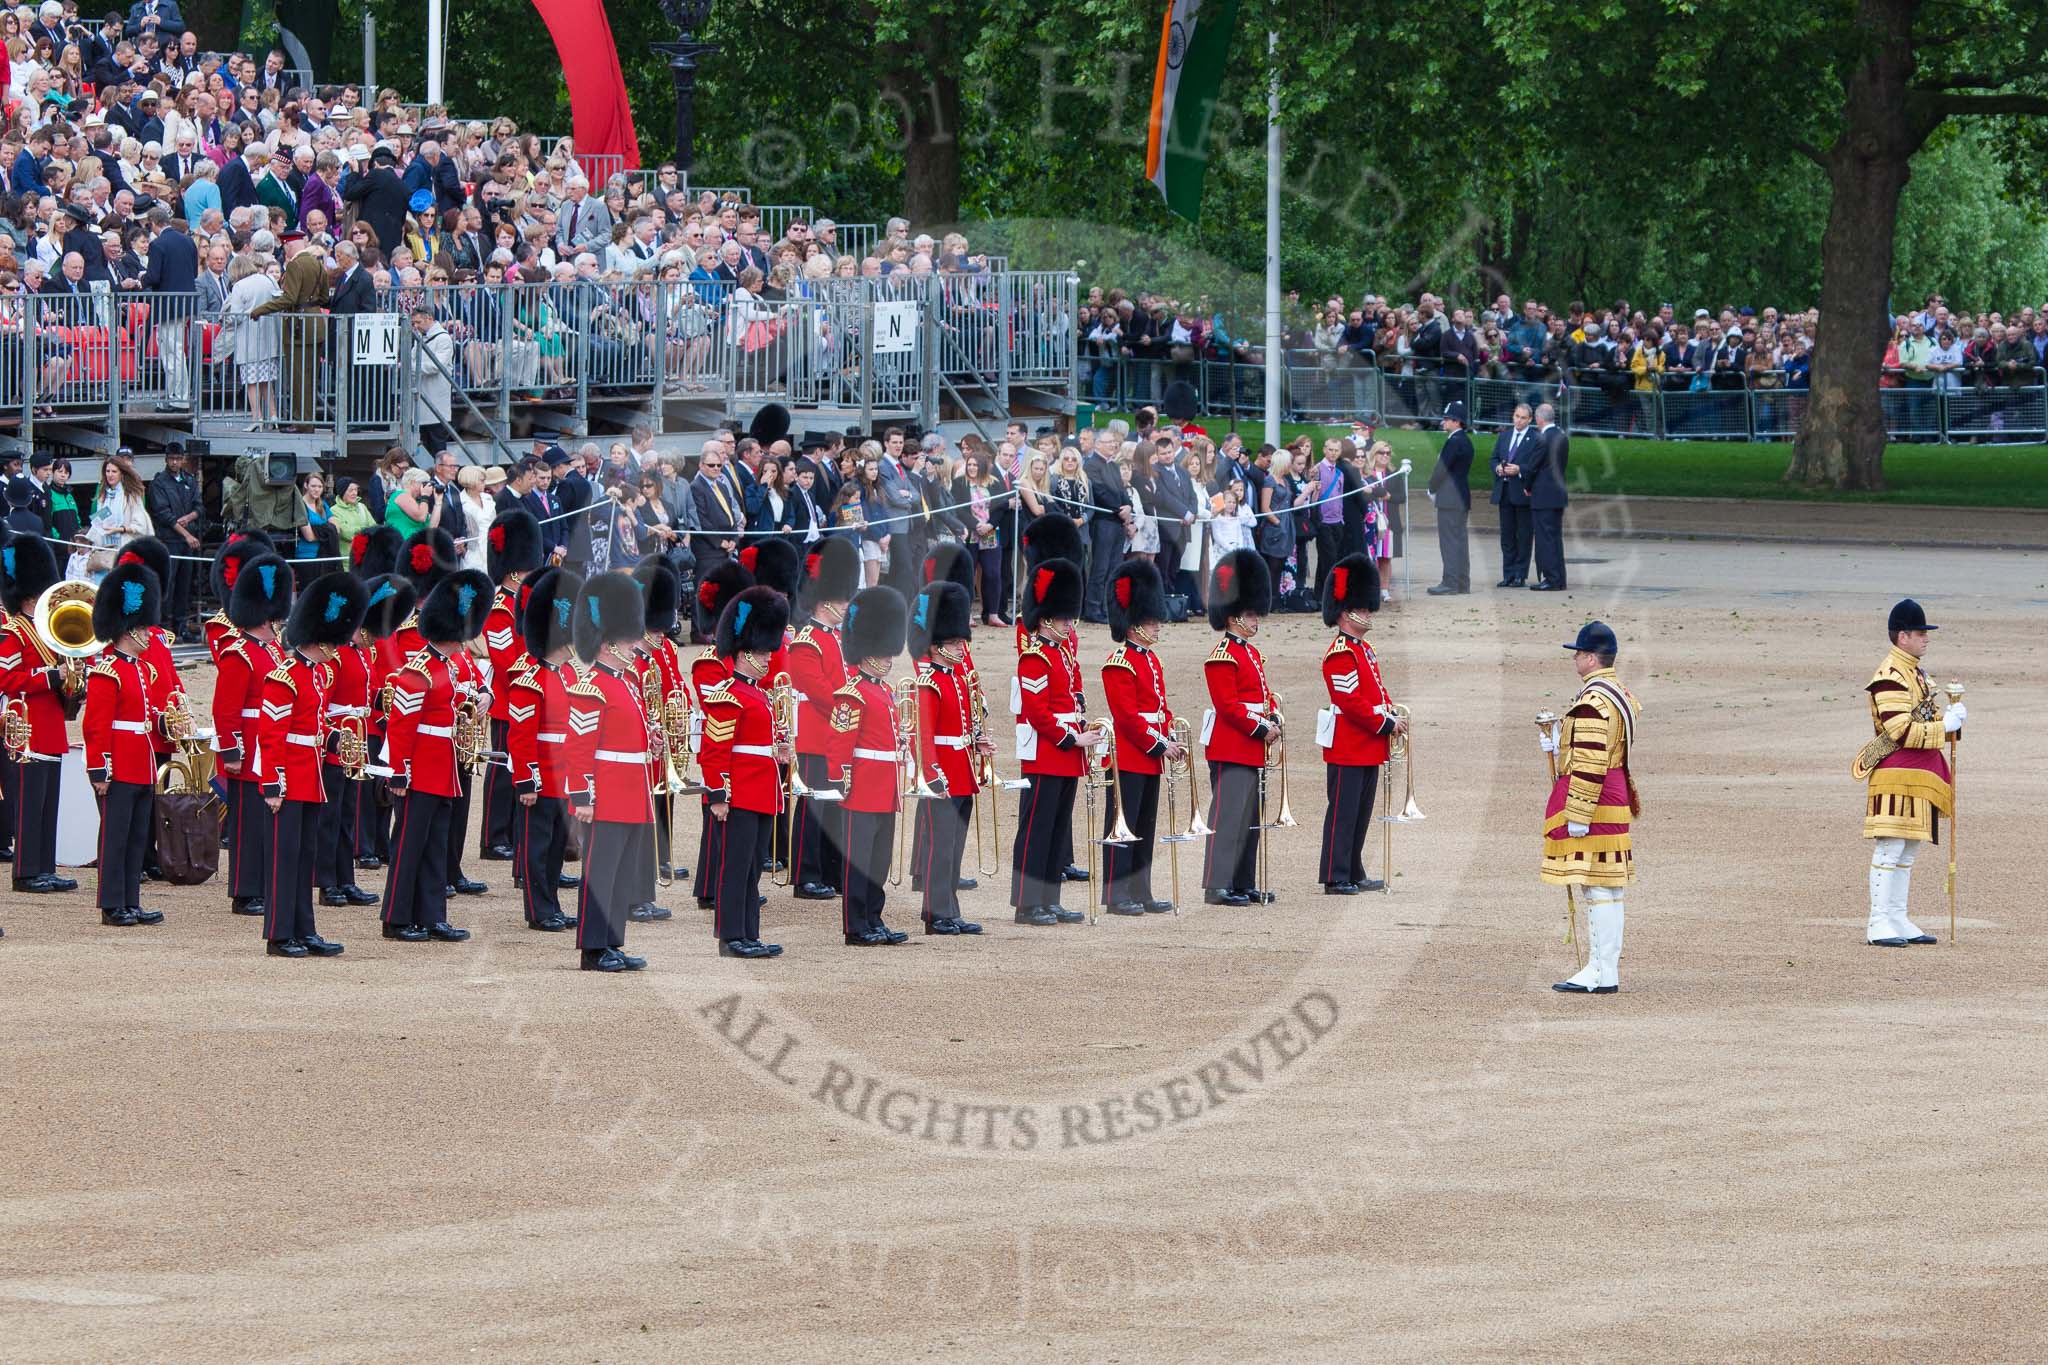 Trooping the Colour 2013: The Band of the Irish Guards, with the Blue plumes, and the Band of the Coldstream Guards, with red plumes. Image #63, 15 June 2013 10:17 Horse Guards Parade, London, UK